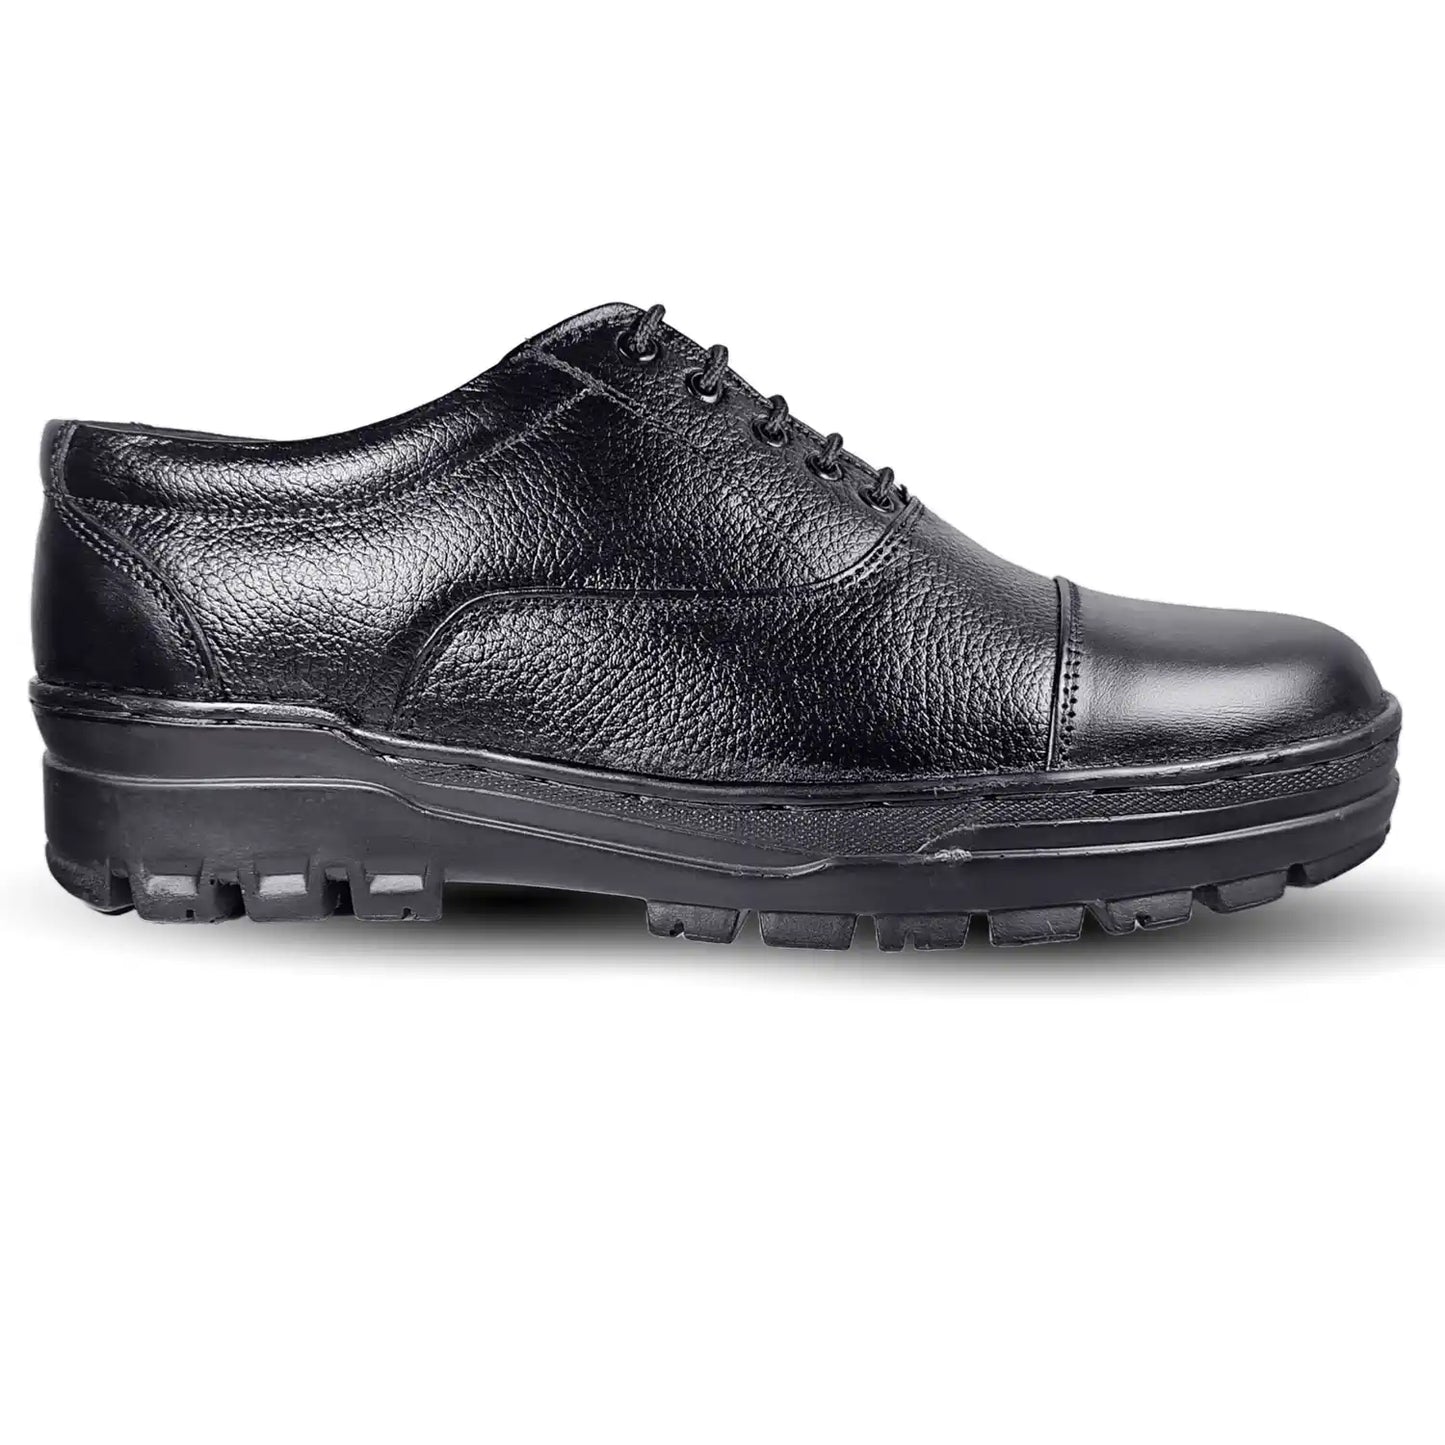 Police Dress Shoes Pure Leather Oxford Lace Up